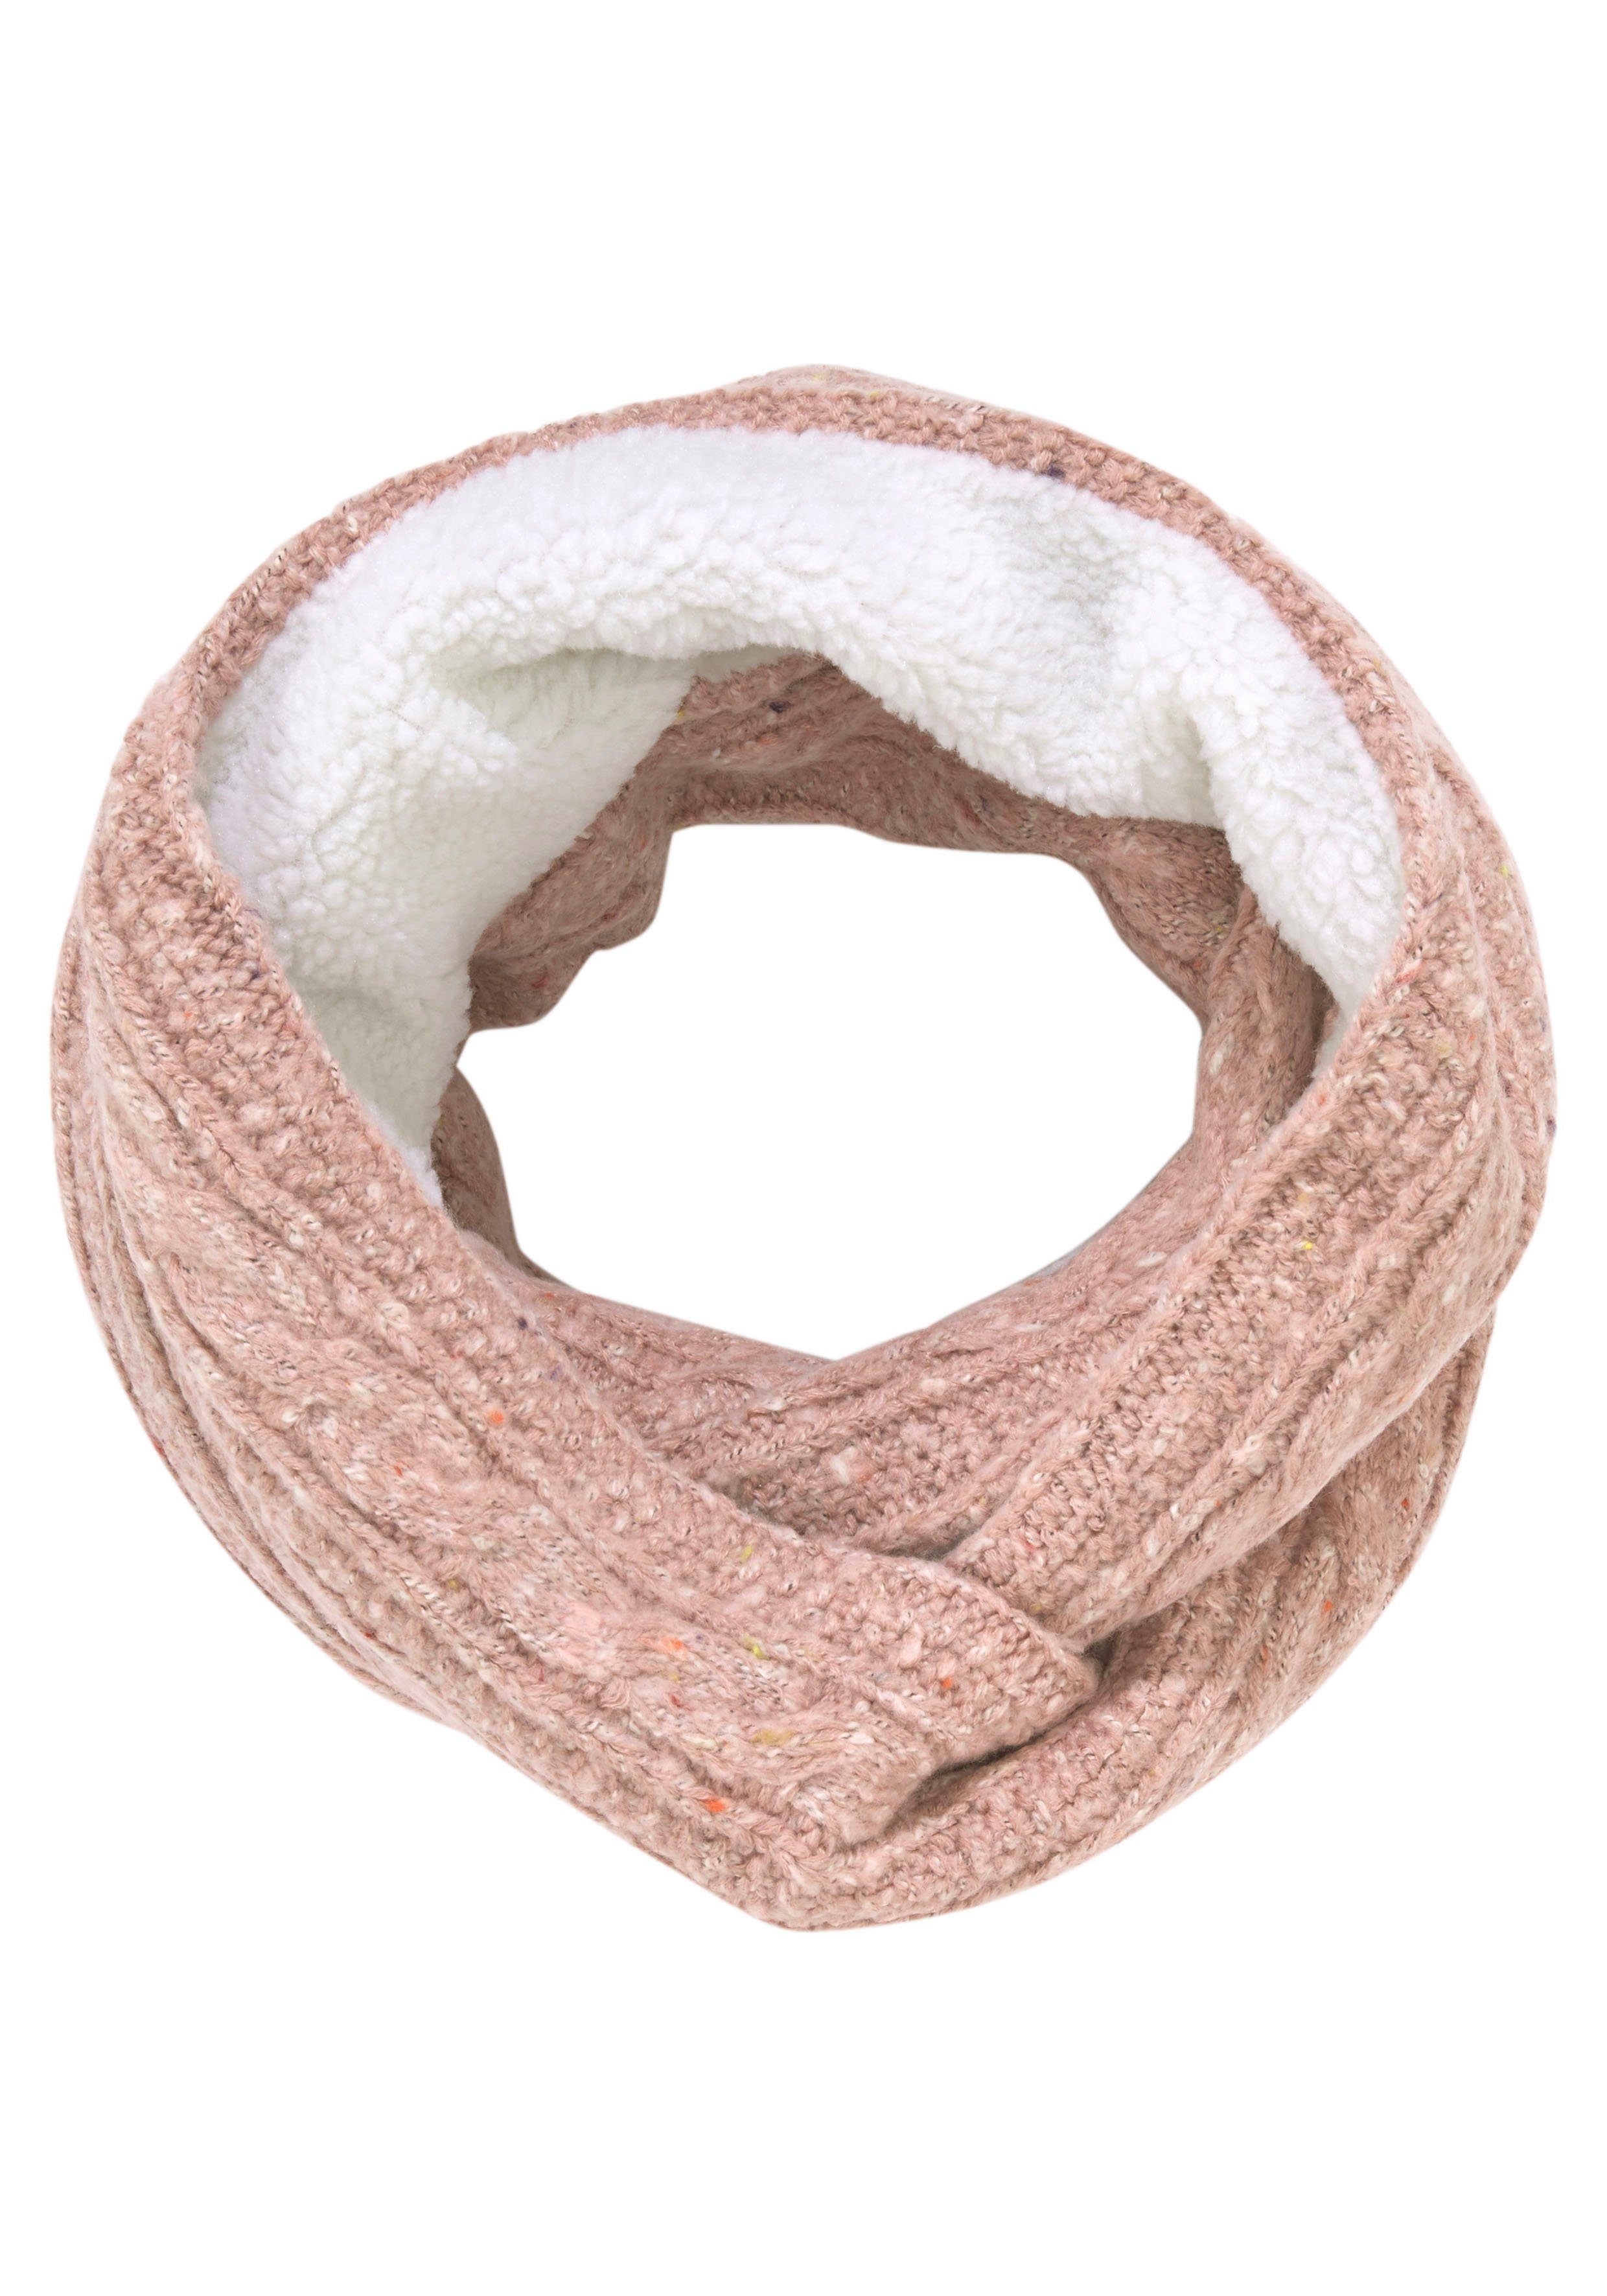 Superdry Loop, (1-St), Gracie Cable Snood, Logoemblem online kaufen | OTTO